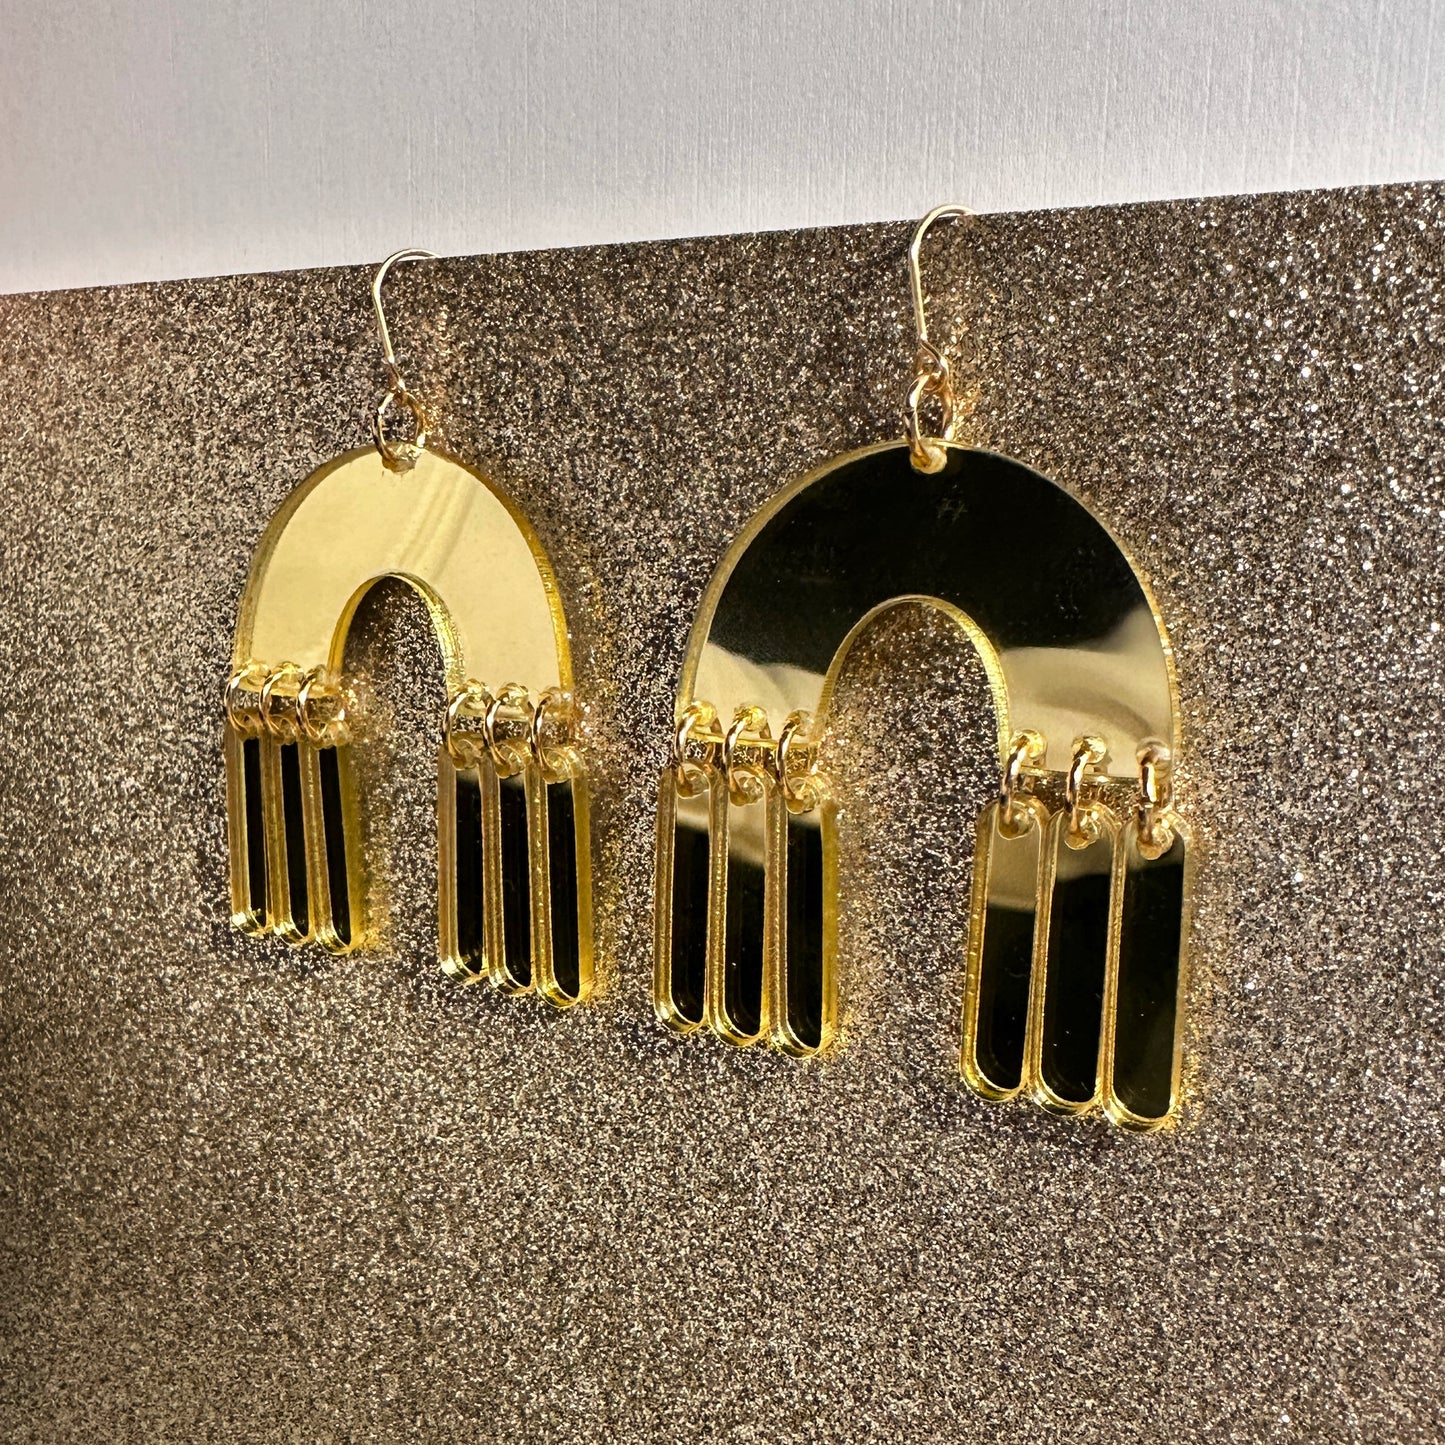 mad planet mirrored gold arches handmade earrings